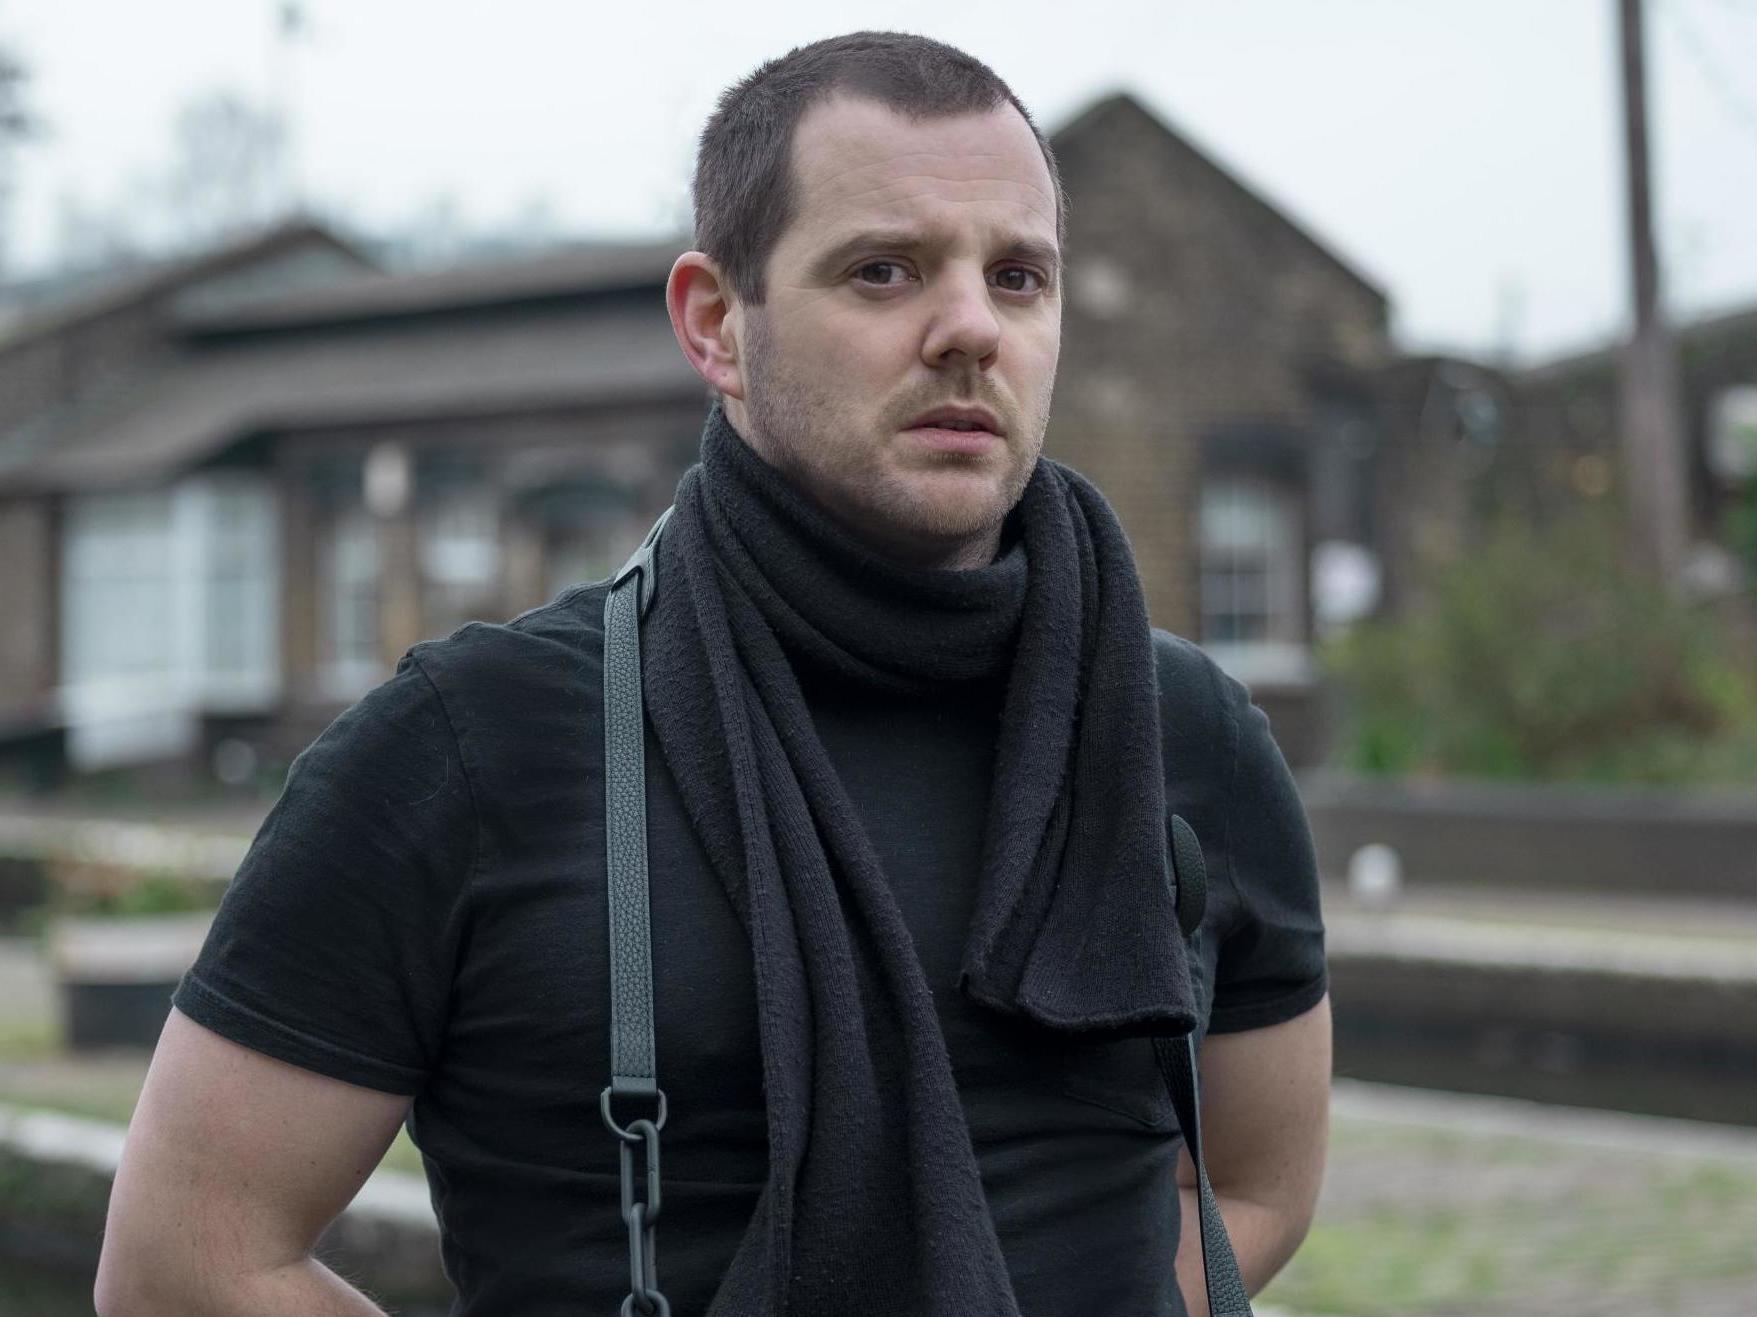 Mike Skinner: 'Pulling the Edward Colston statue down was driven as much by white guilt as black power'